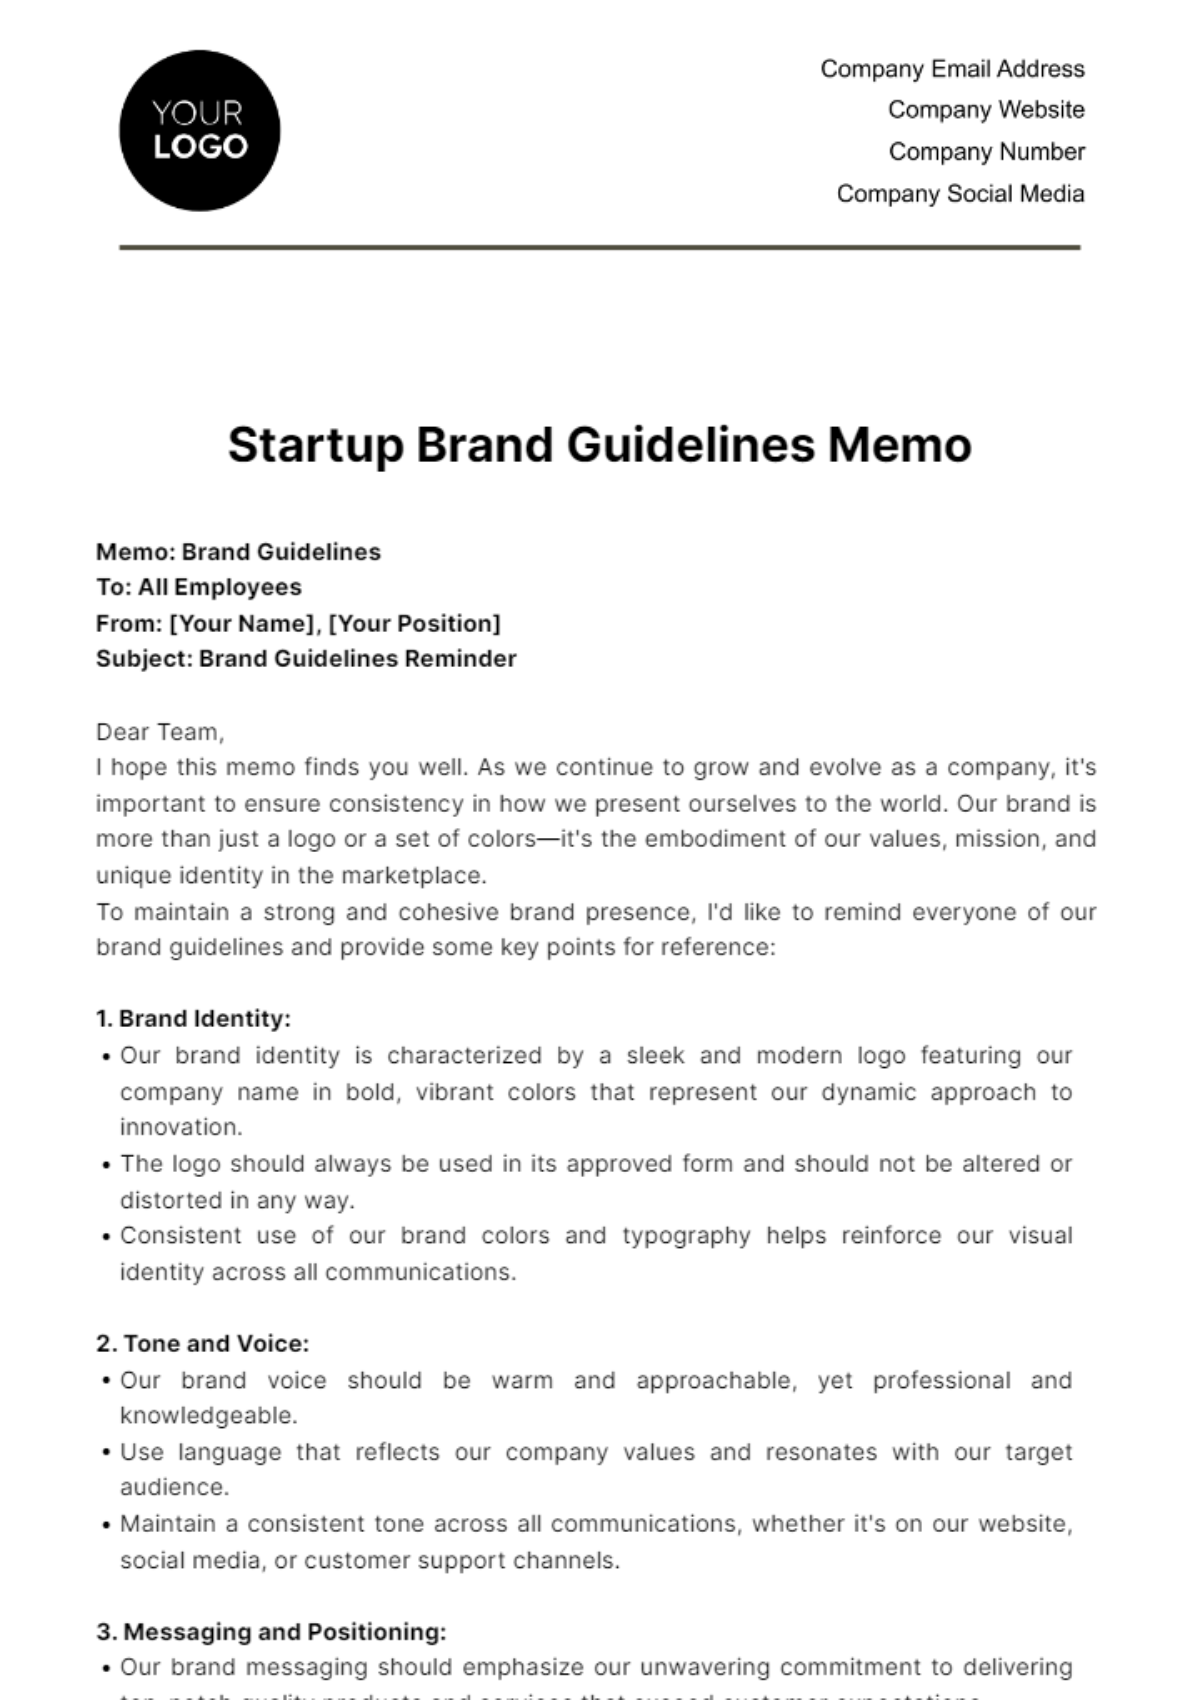 Startup Brand Guidelines Memo Template